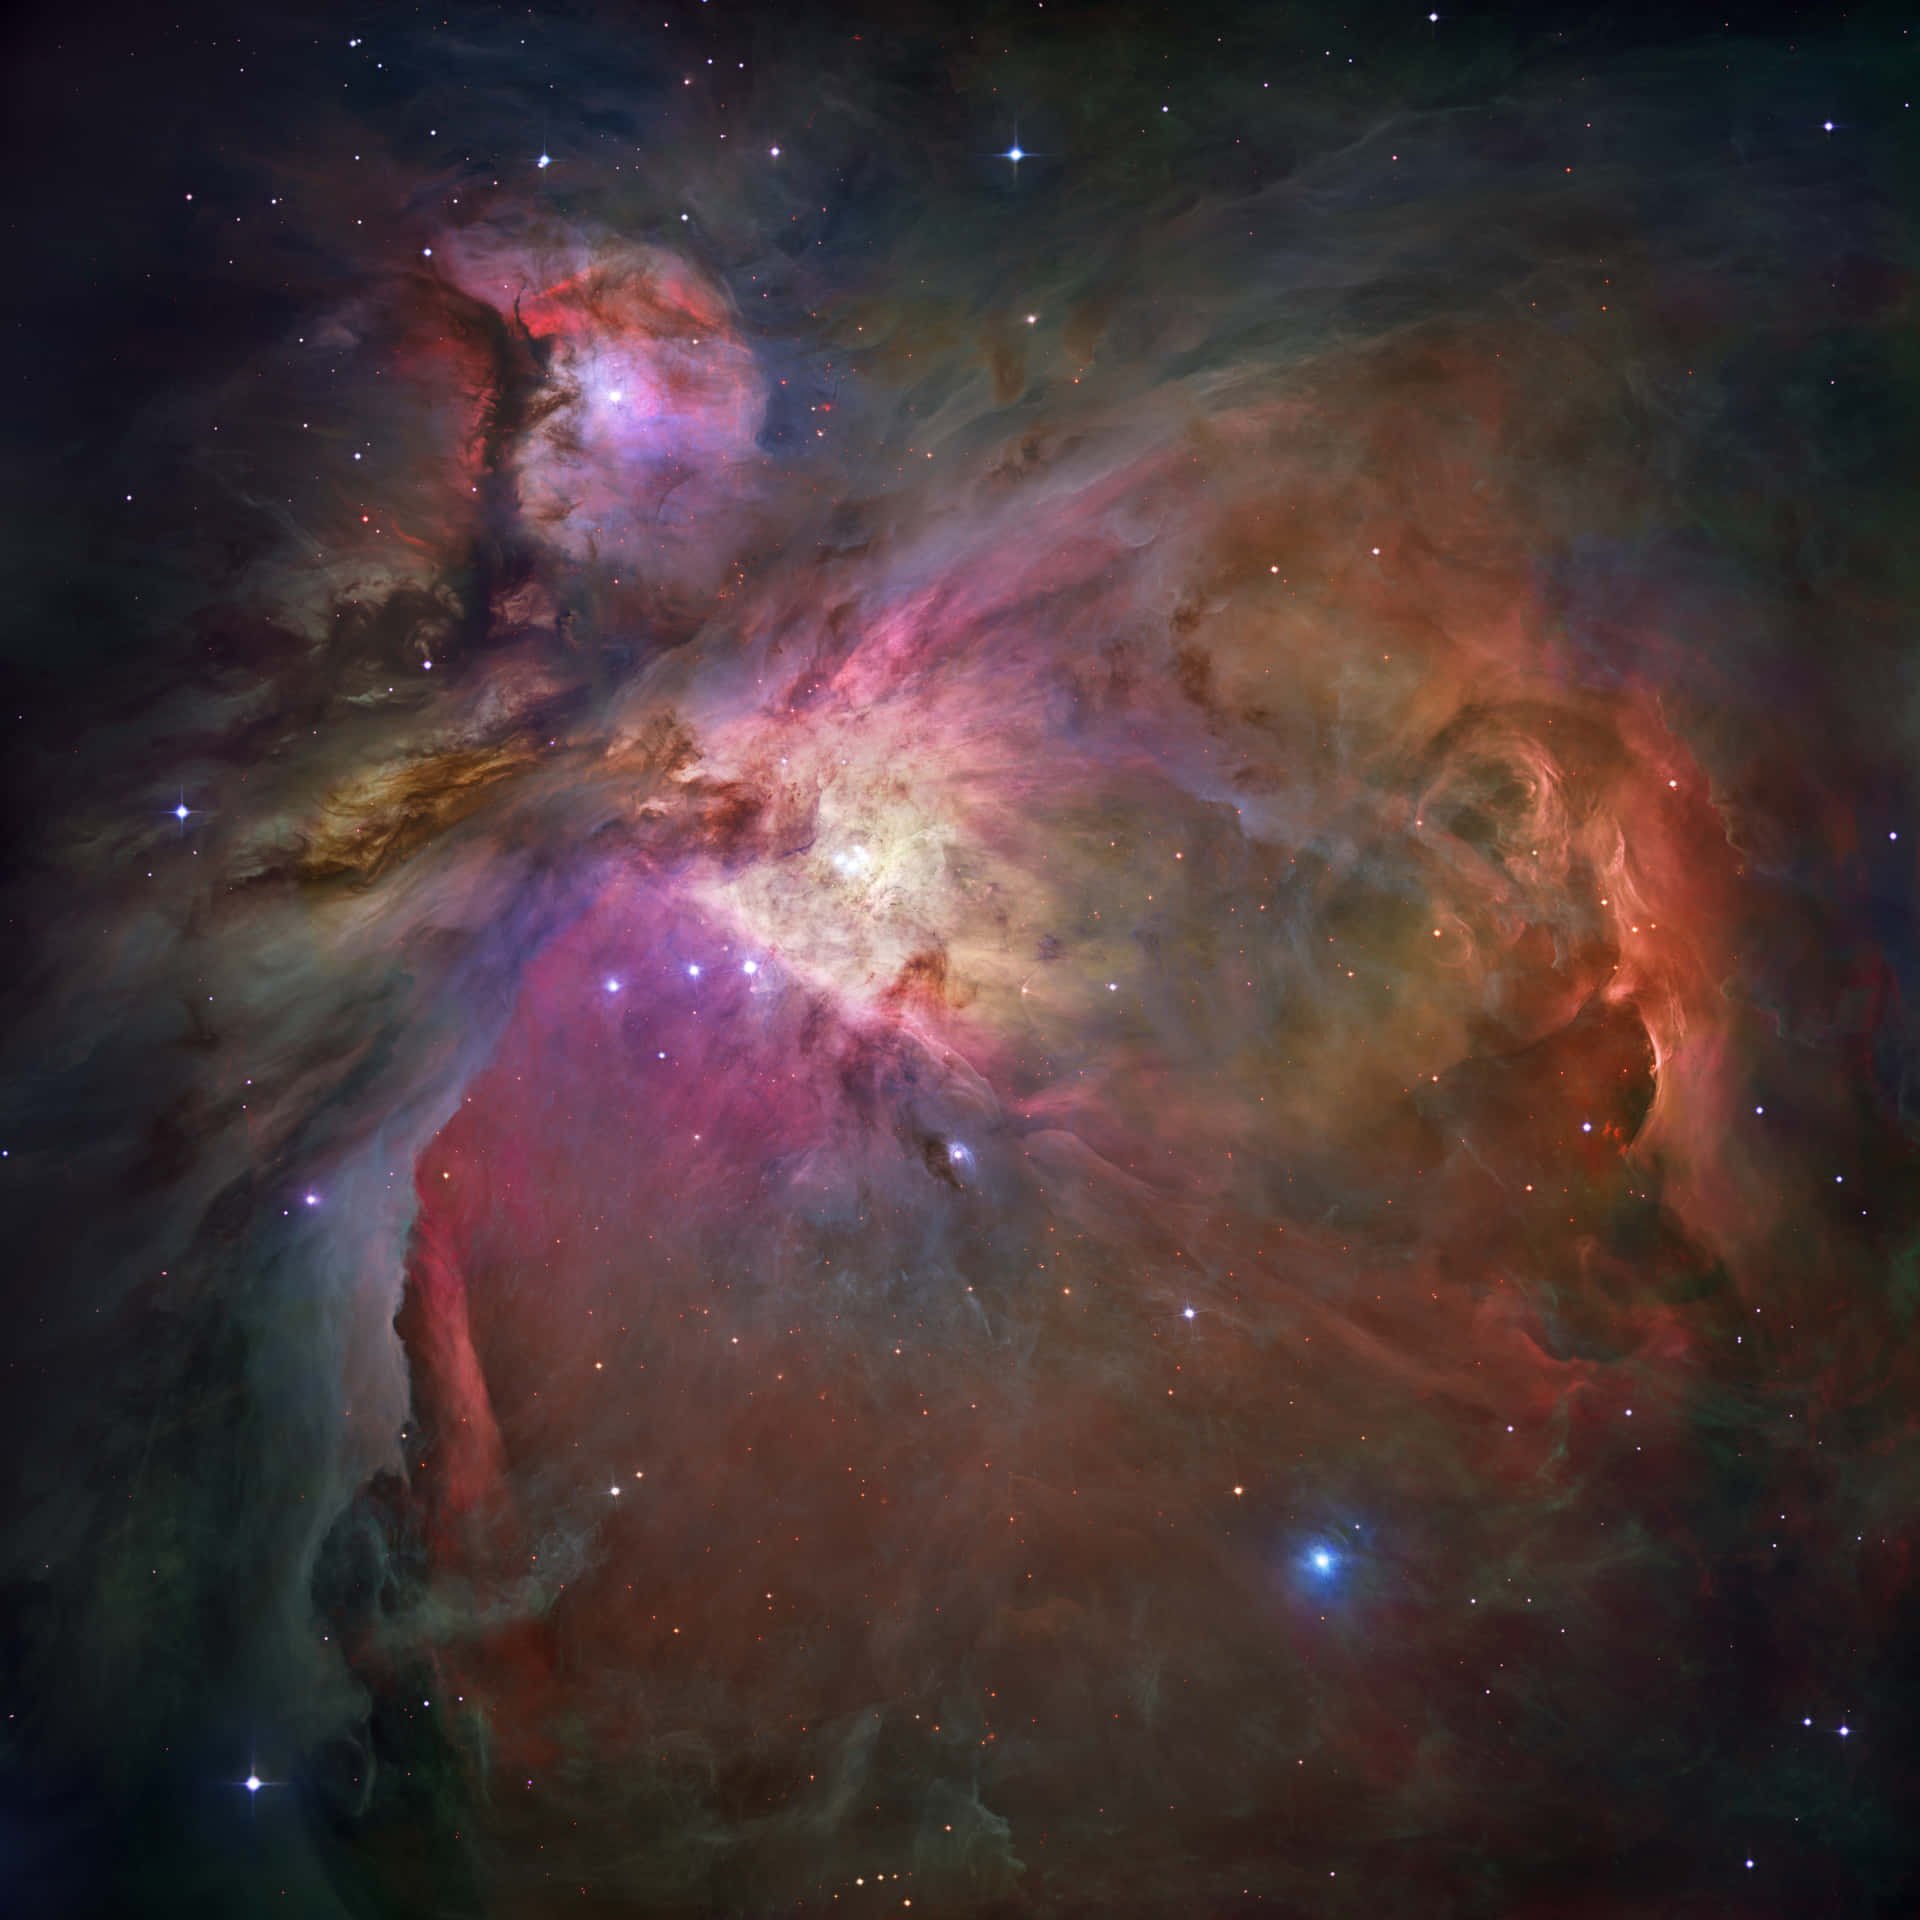 Get an up close look at the beauty of the Universe with Hubble 4K Wallpaper